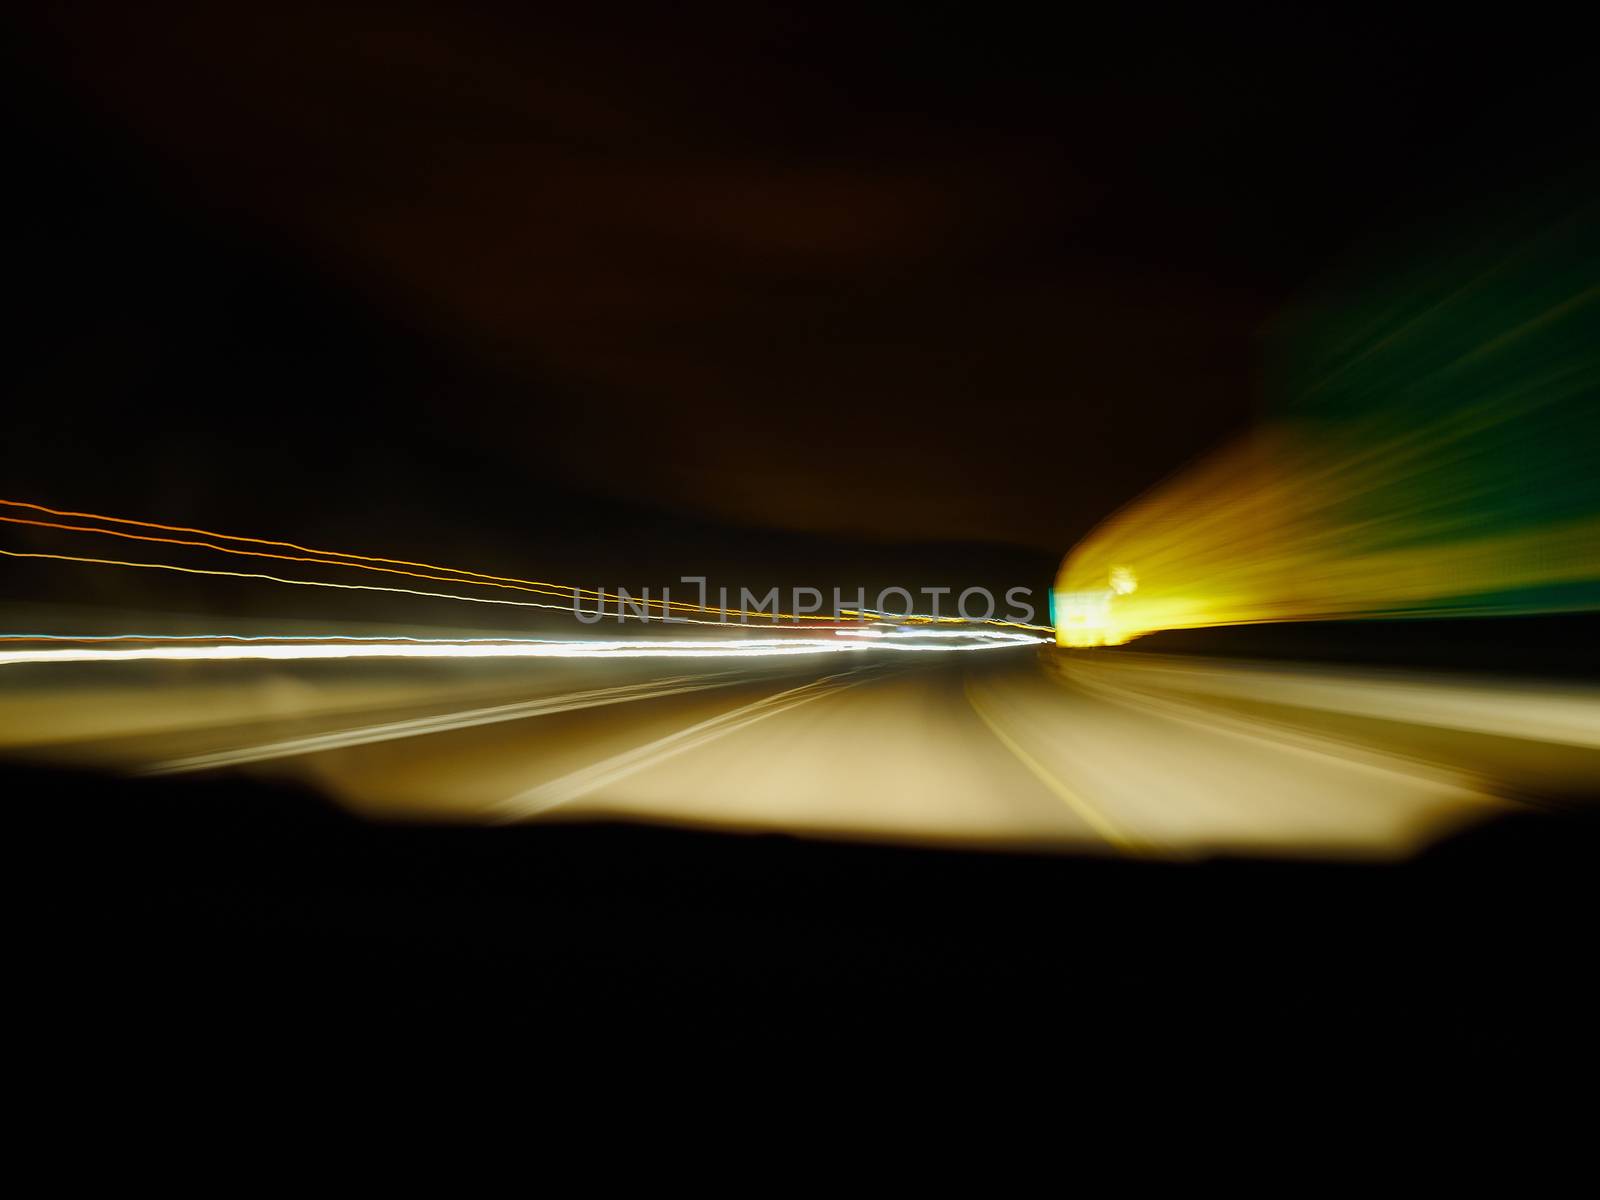 Driving at night scenery by Ronyzmbow